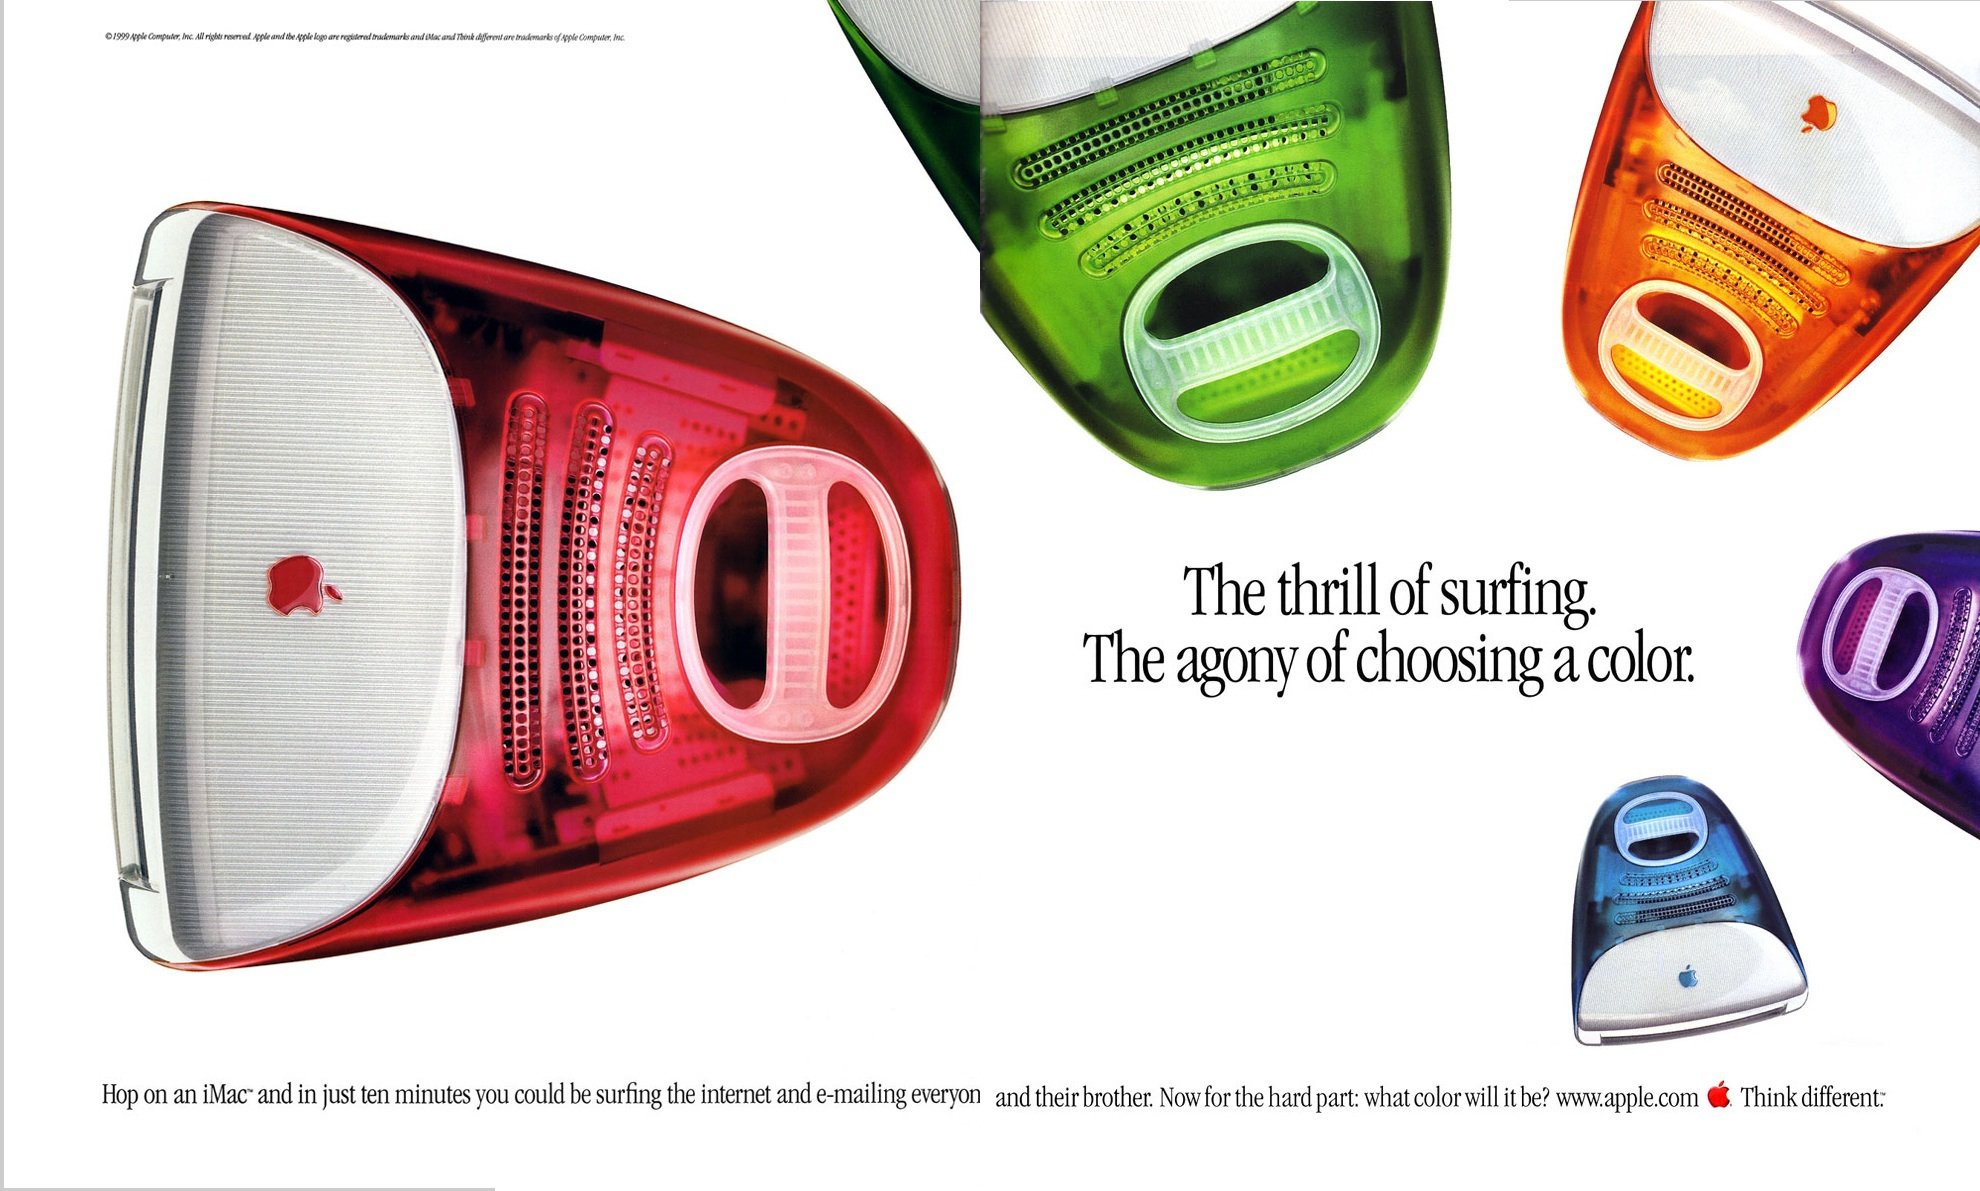 Vivid colors made the early iMac design stand out in a sea of beige. An iMac G3 ad, "The thrill of surfing."